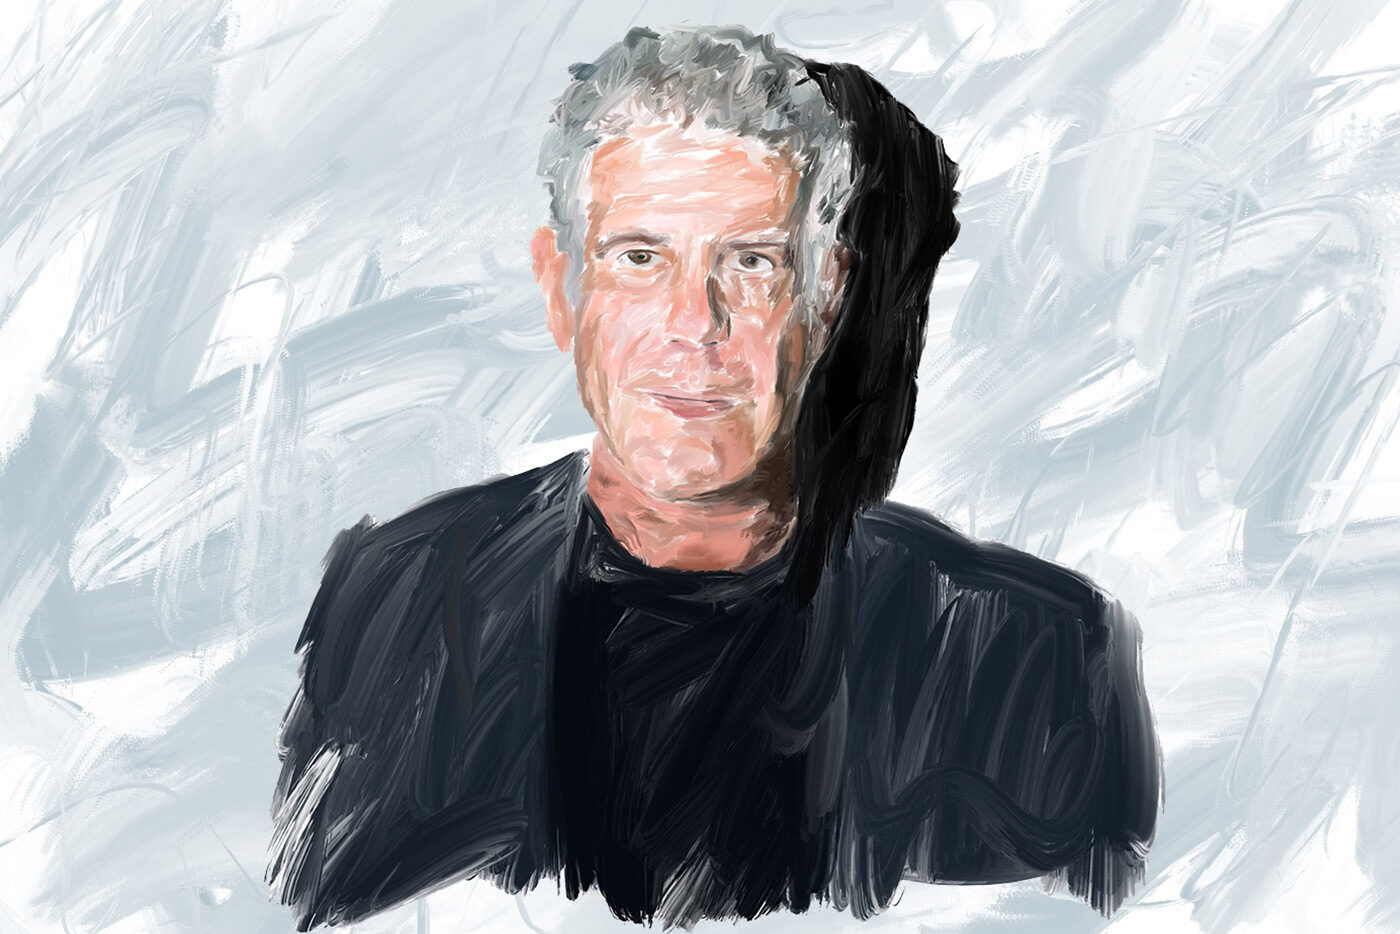 Poorly drawn portrait (Poortrait) of the great Anthony Bourdain